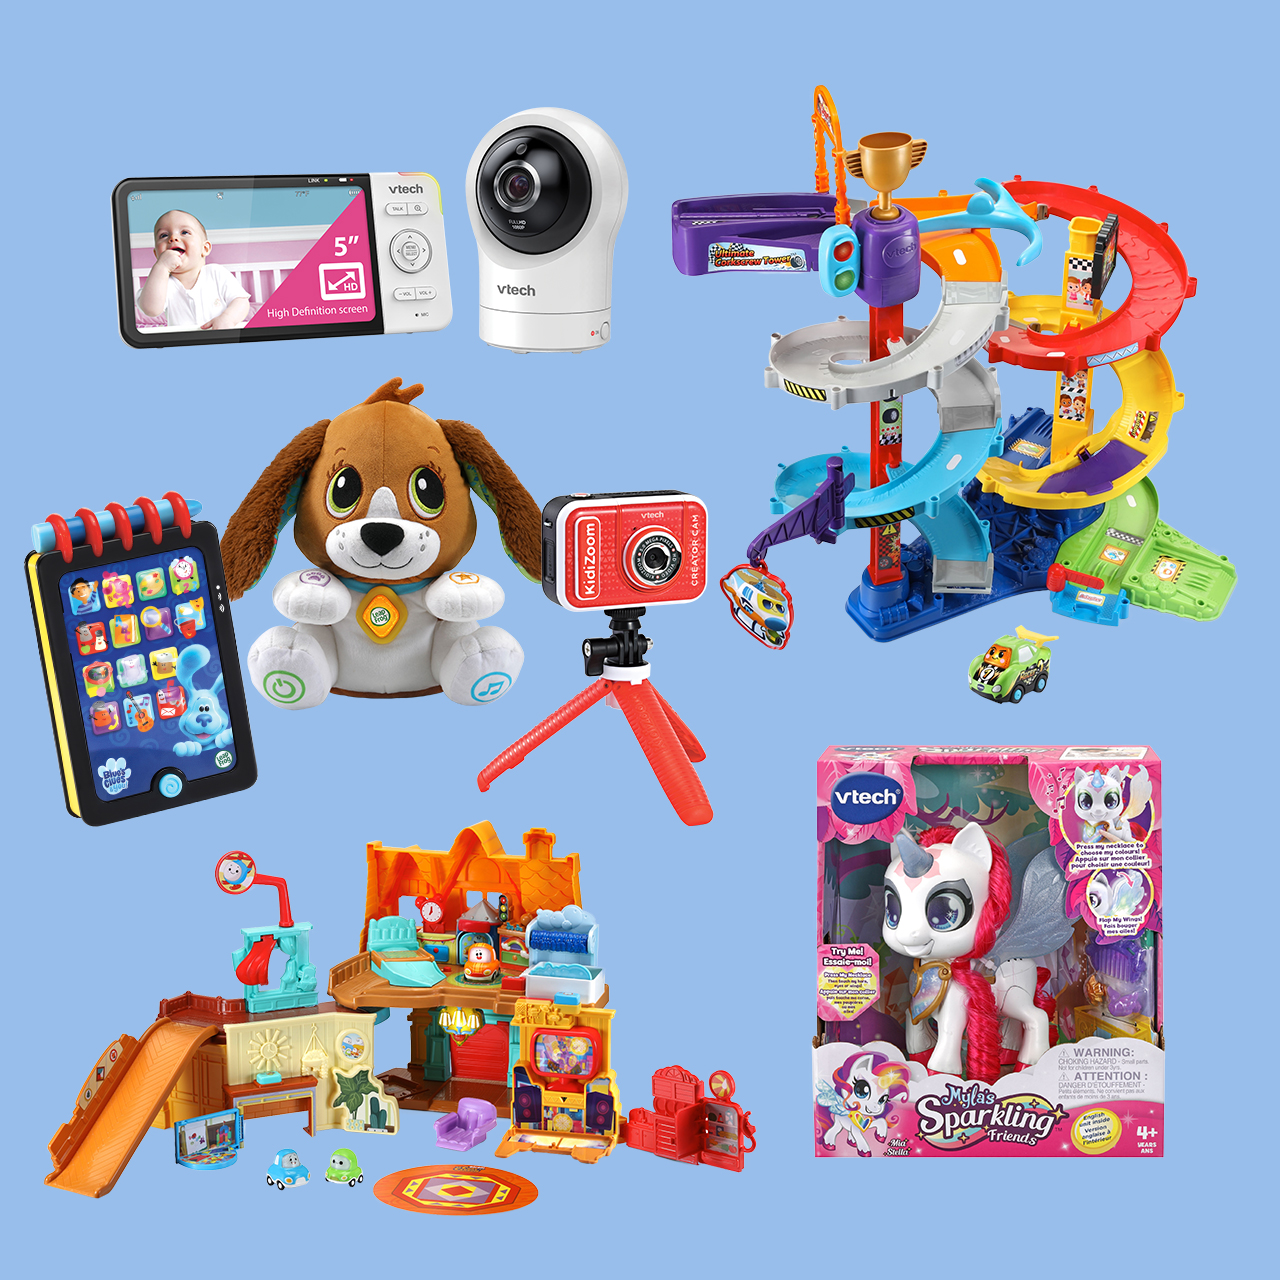 Seven toys as part of the VTech prize pack